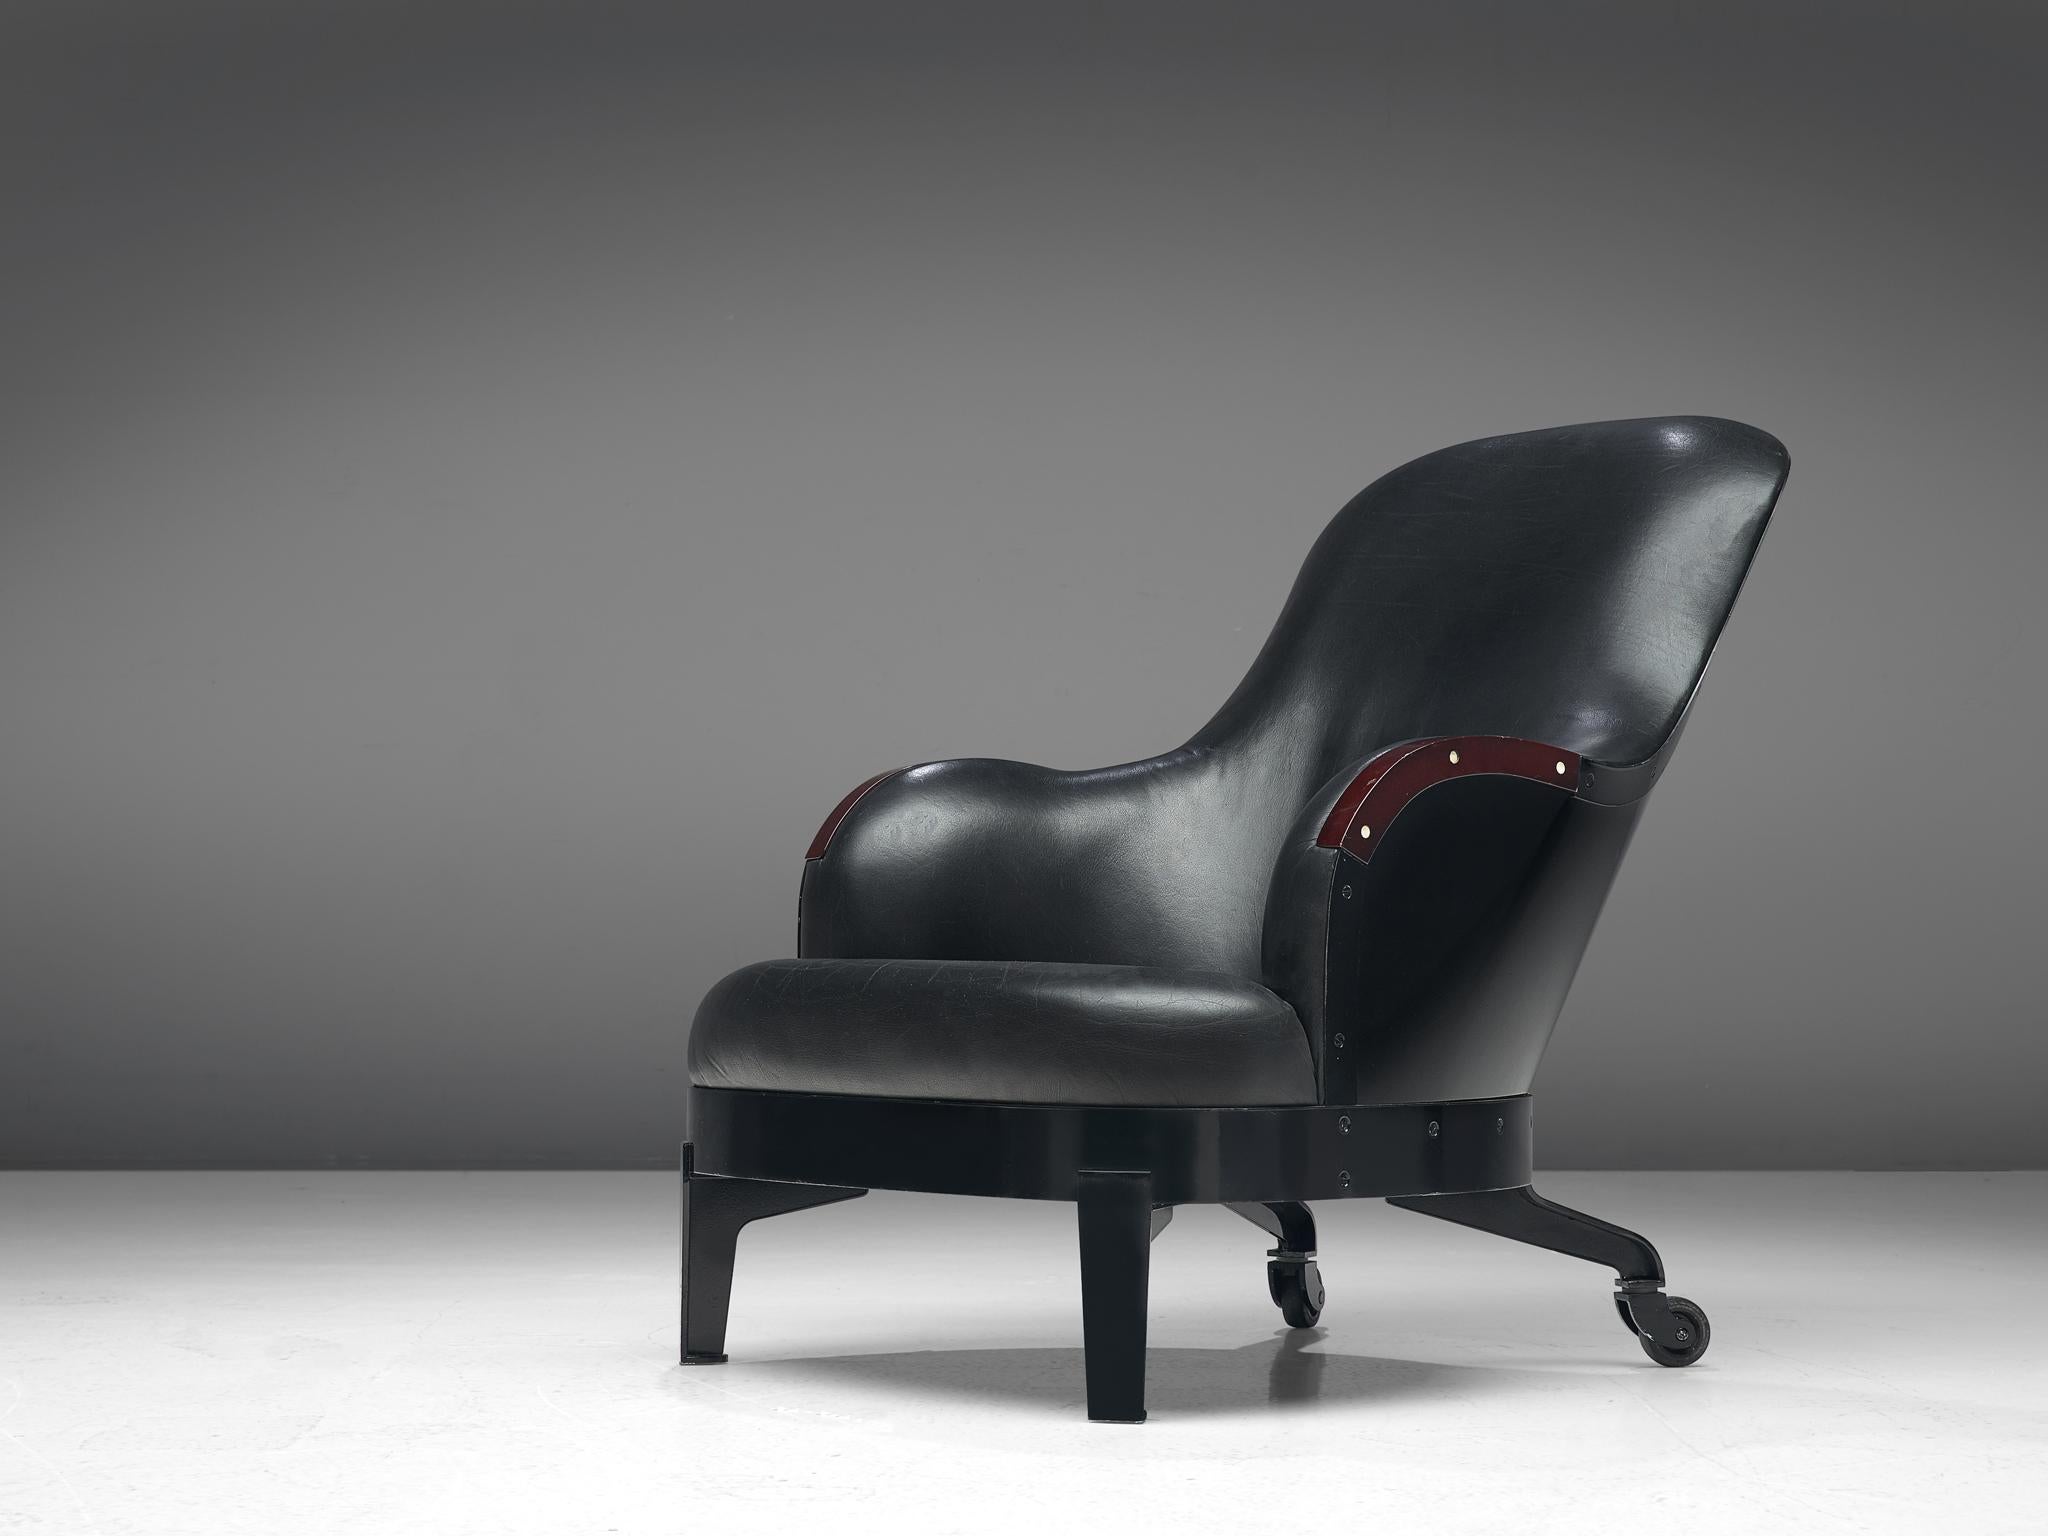 The Ritz lounge chair, in steel, wood, elk horn and leather by Mats Theselius for Källemo, Sweden, 1994.
 
This limited edition lounge chair with caster wheels is executed in black enamel steel, black leather upholstery and elk Horn inlay on the